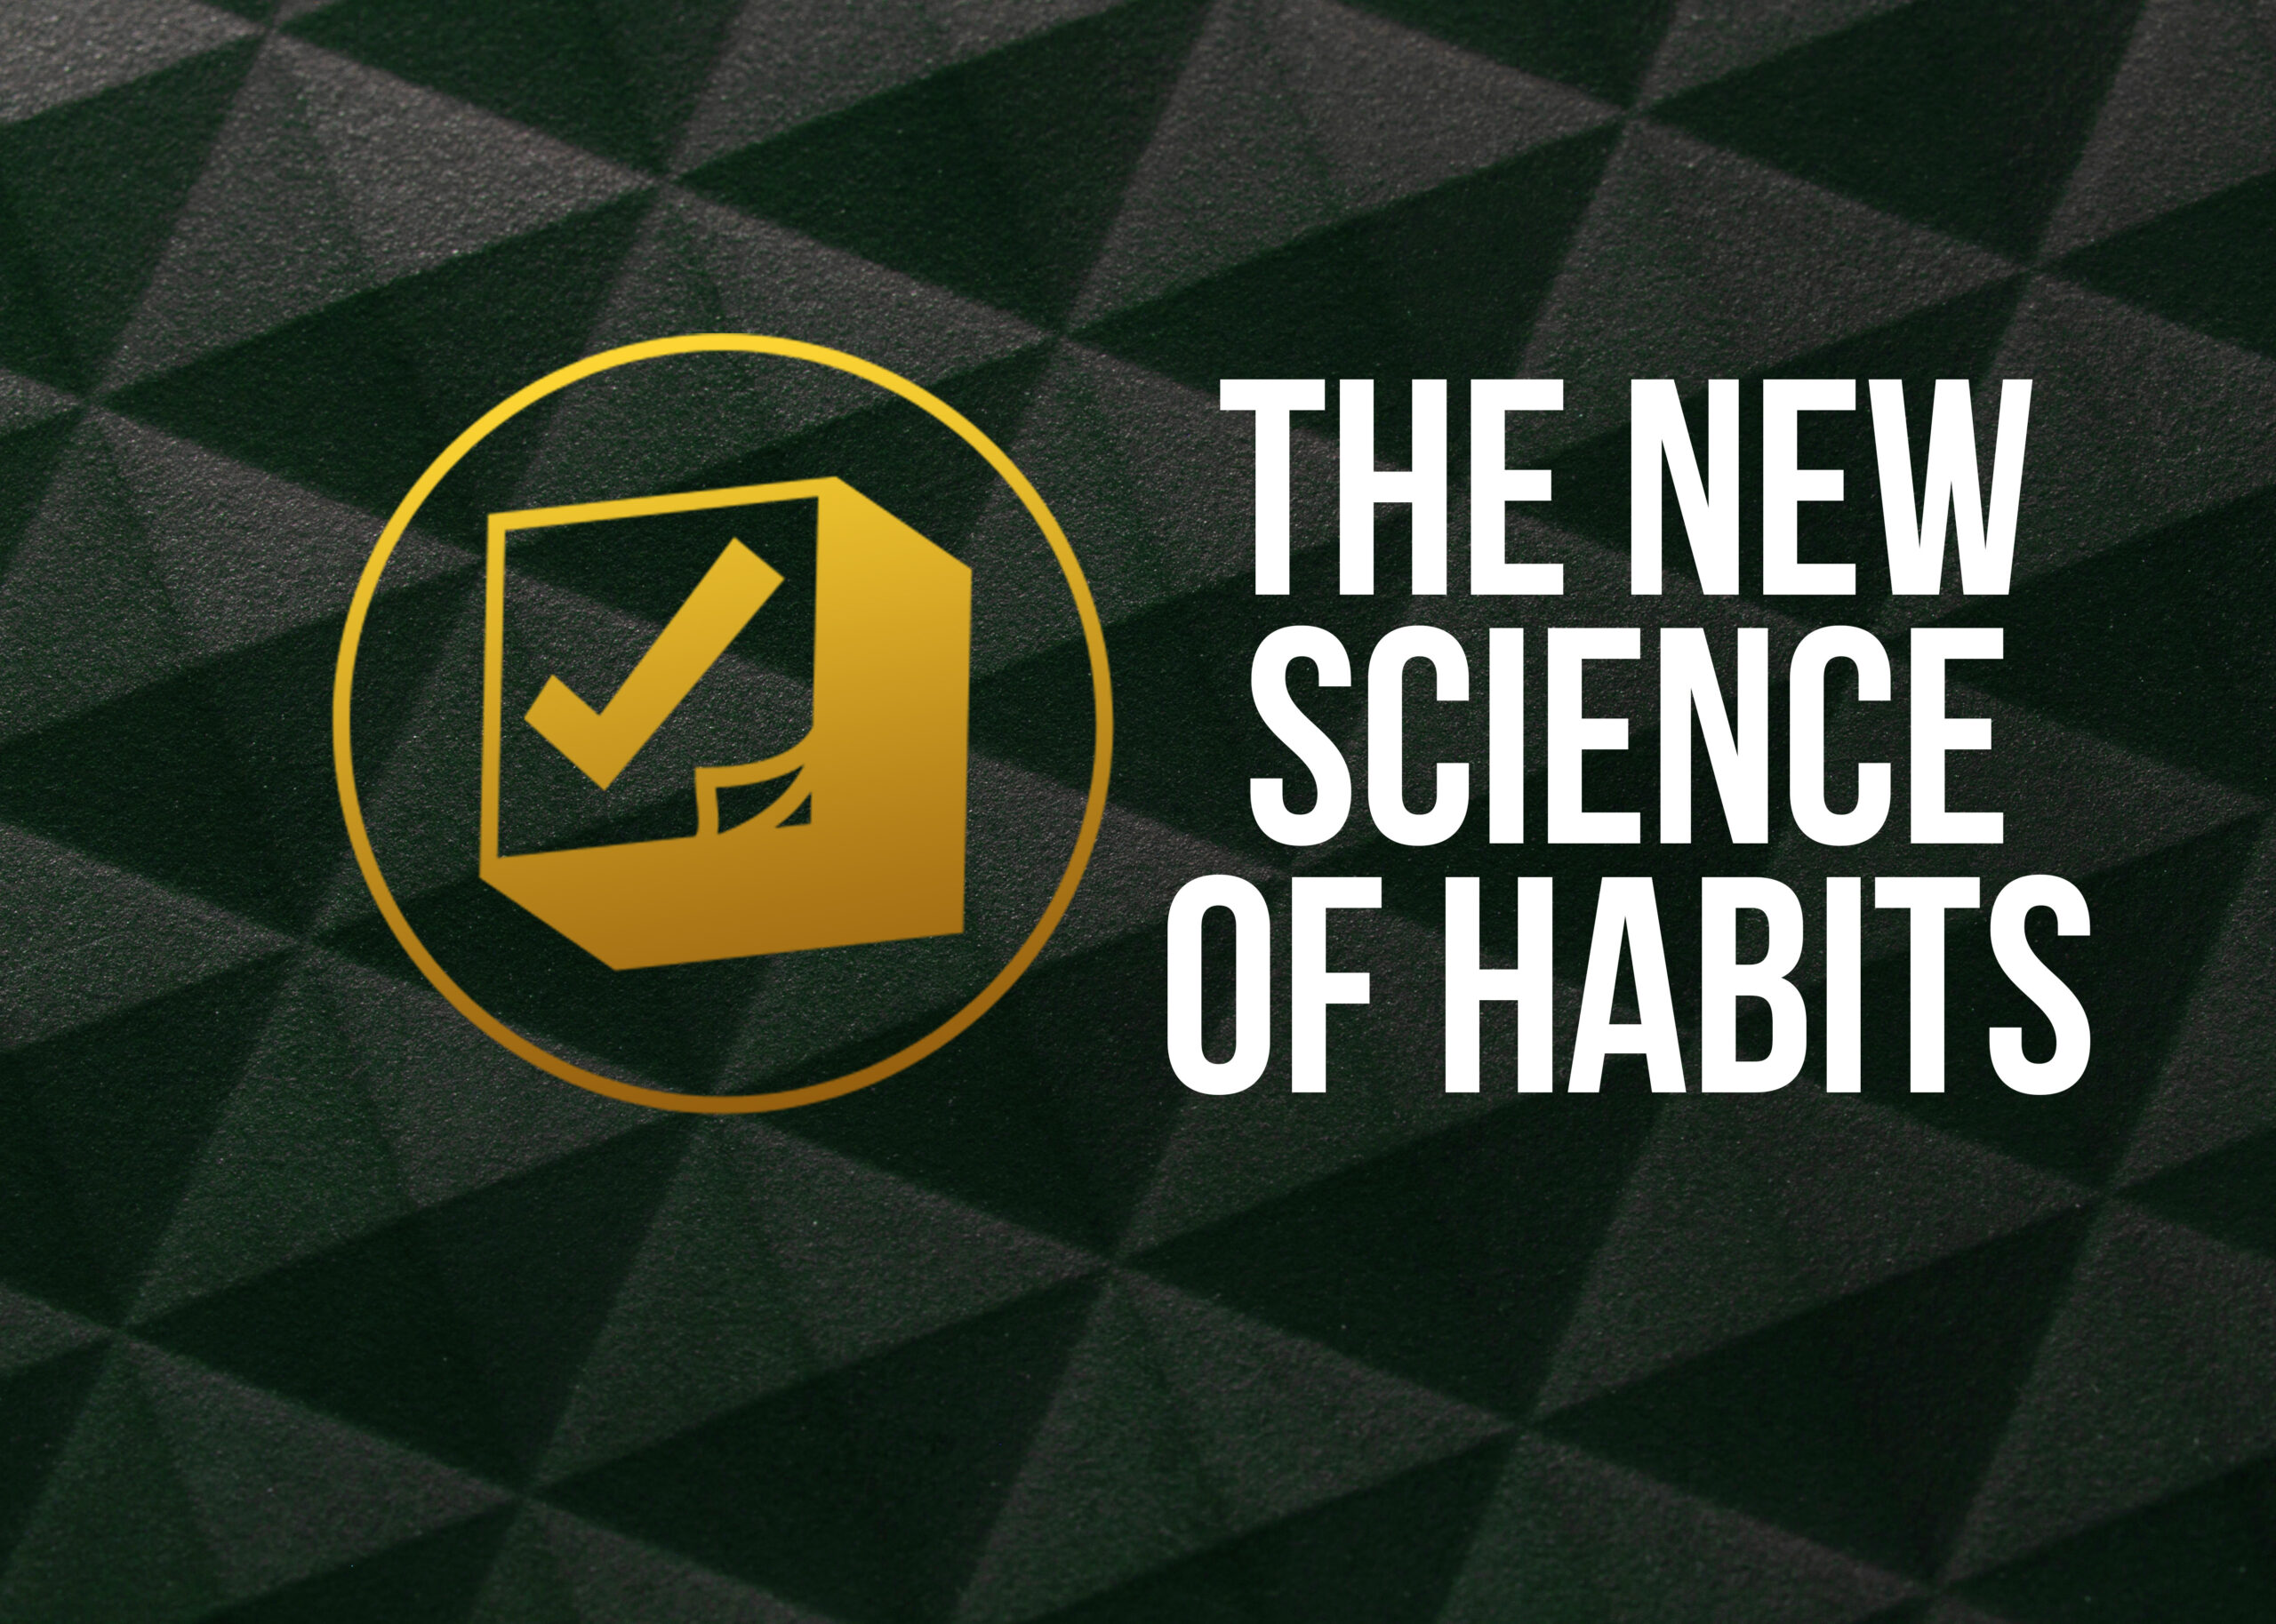 Science of habits